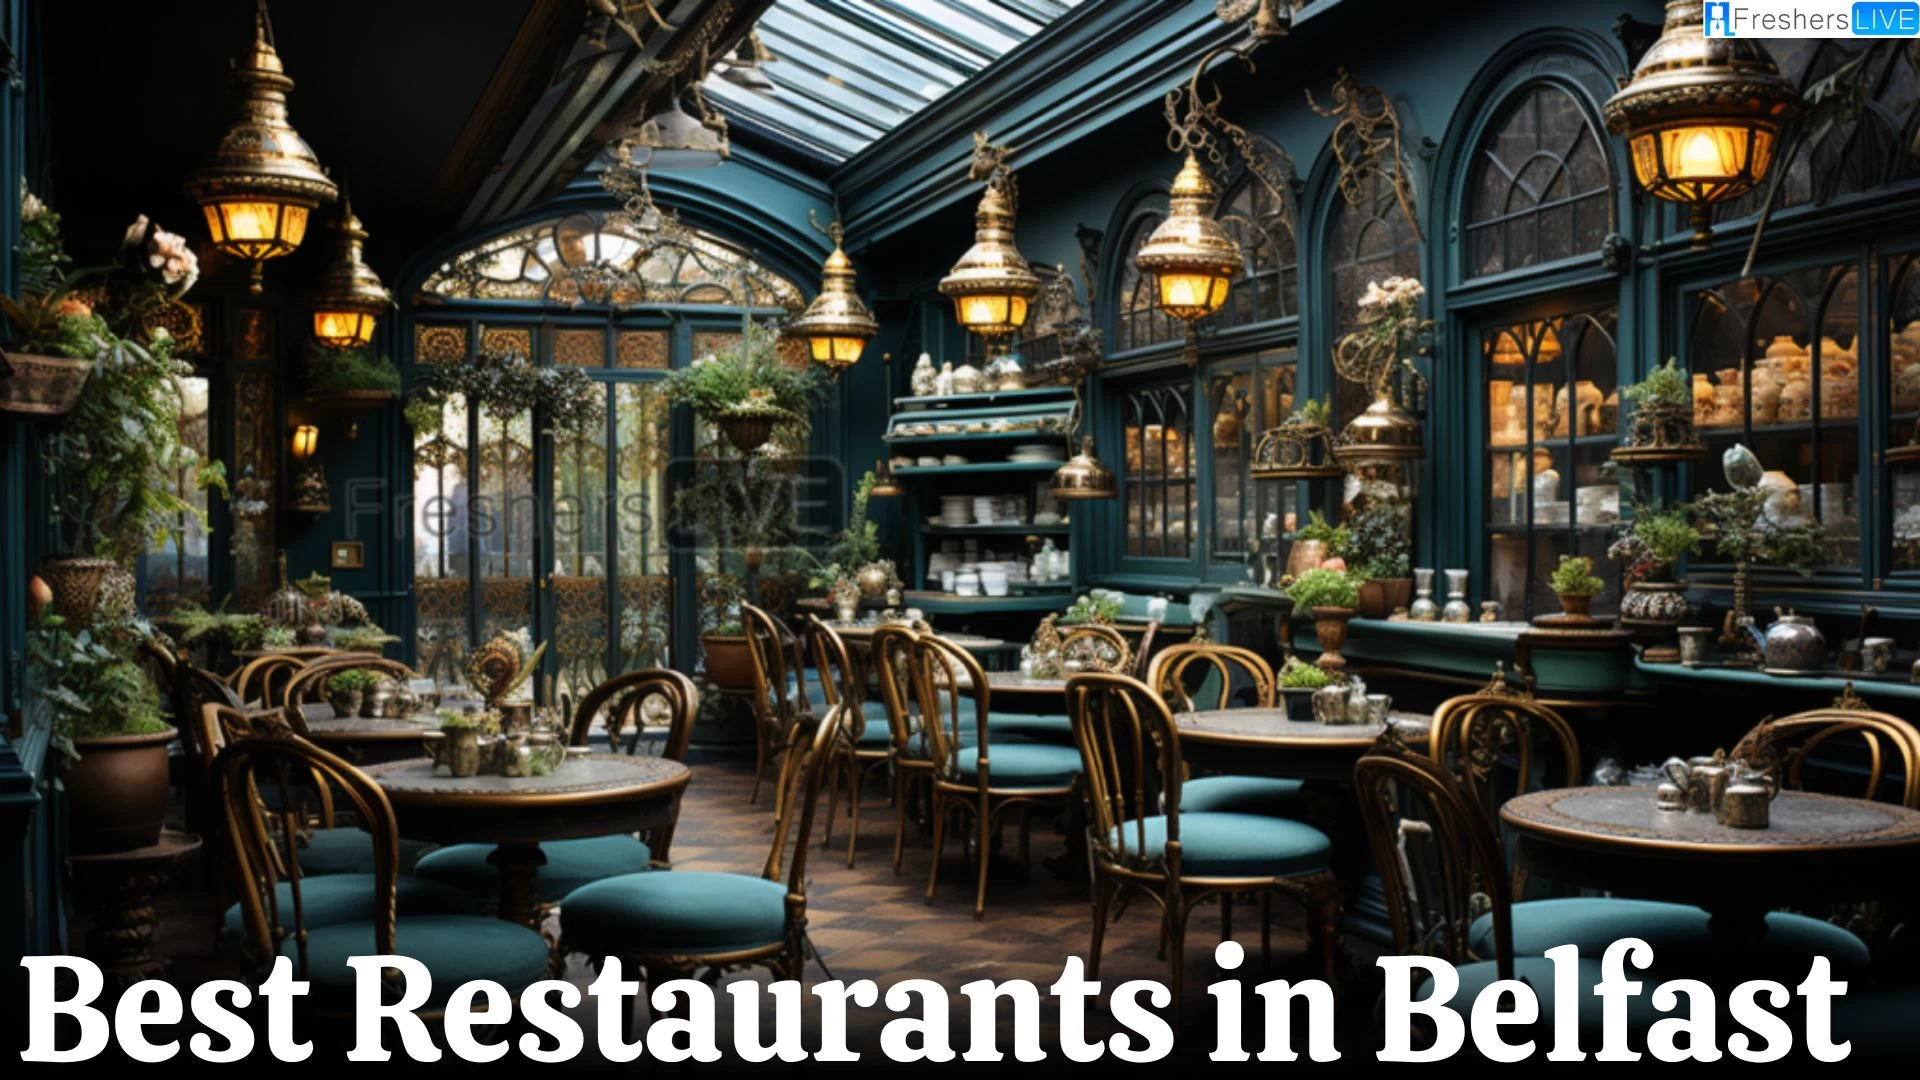 Best Restaurants in Belfast - Top 10 For a Better Dining Experience